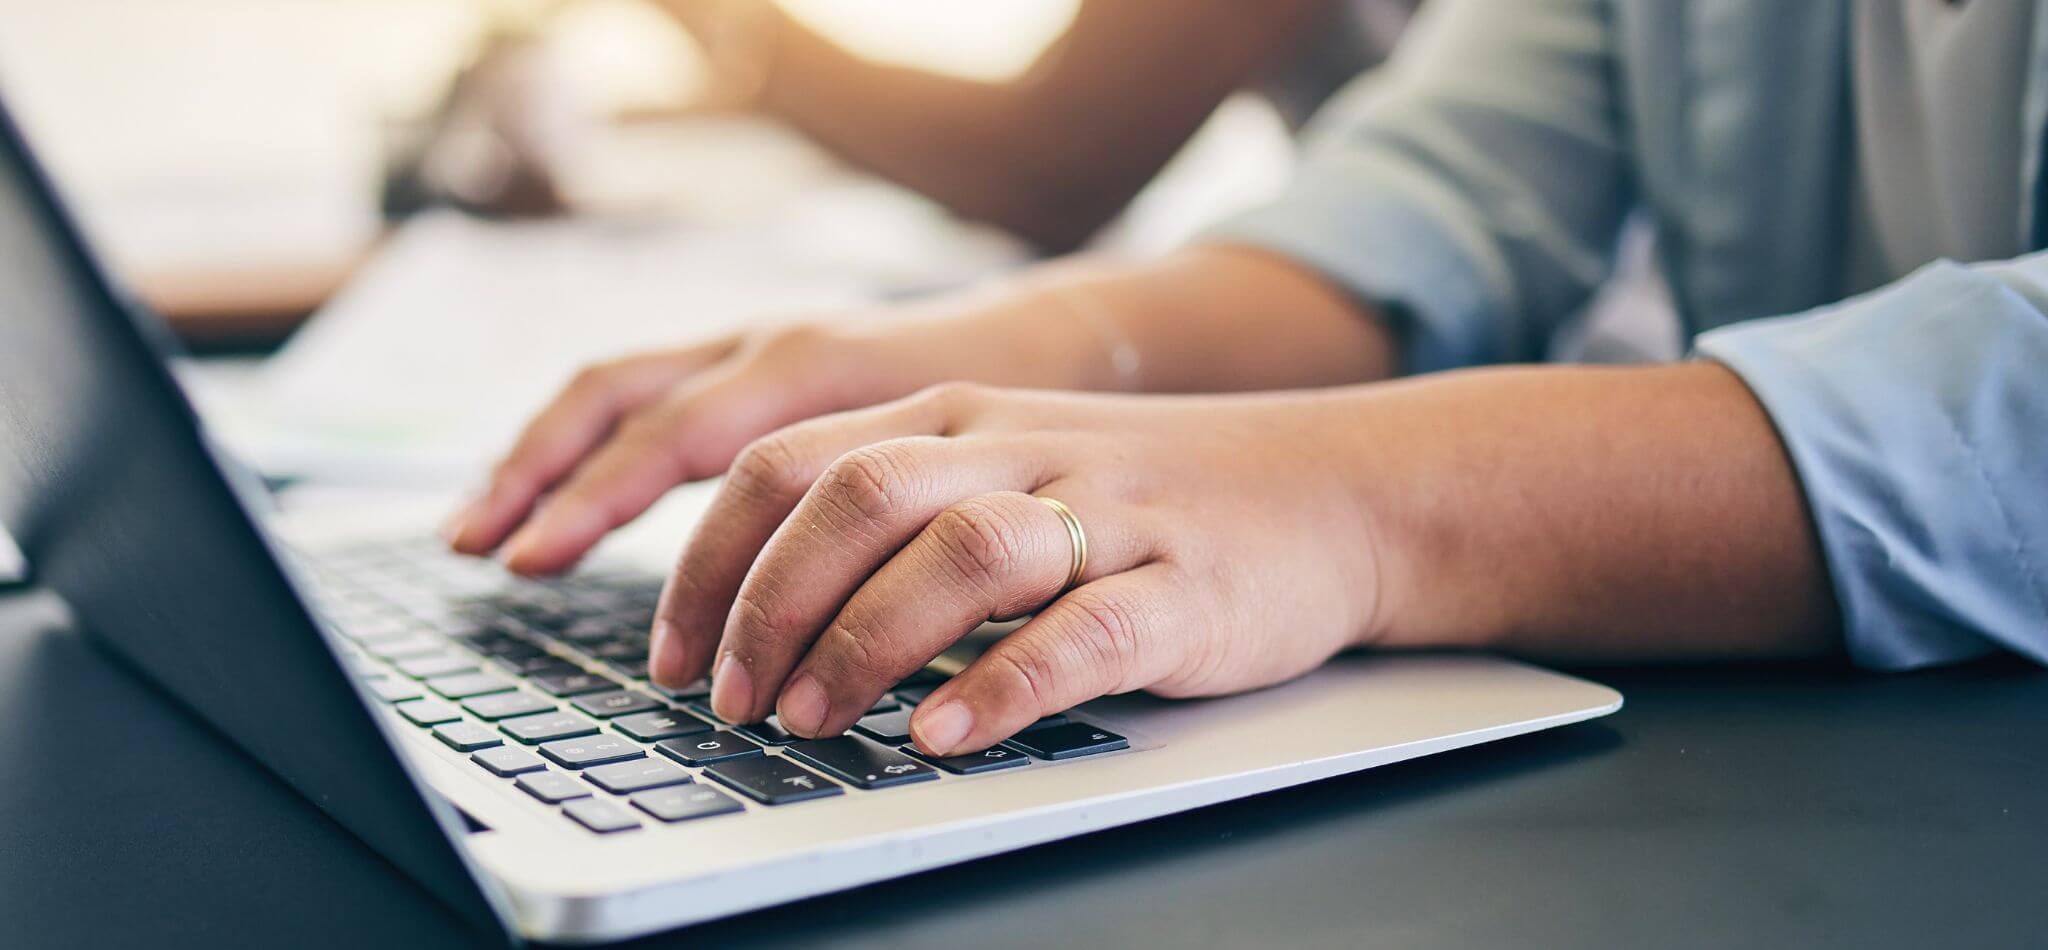 hands typing on keyboard to find major donors for nonprofits on a budget